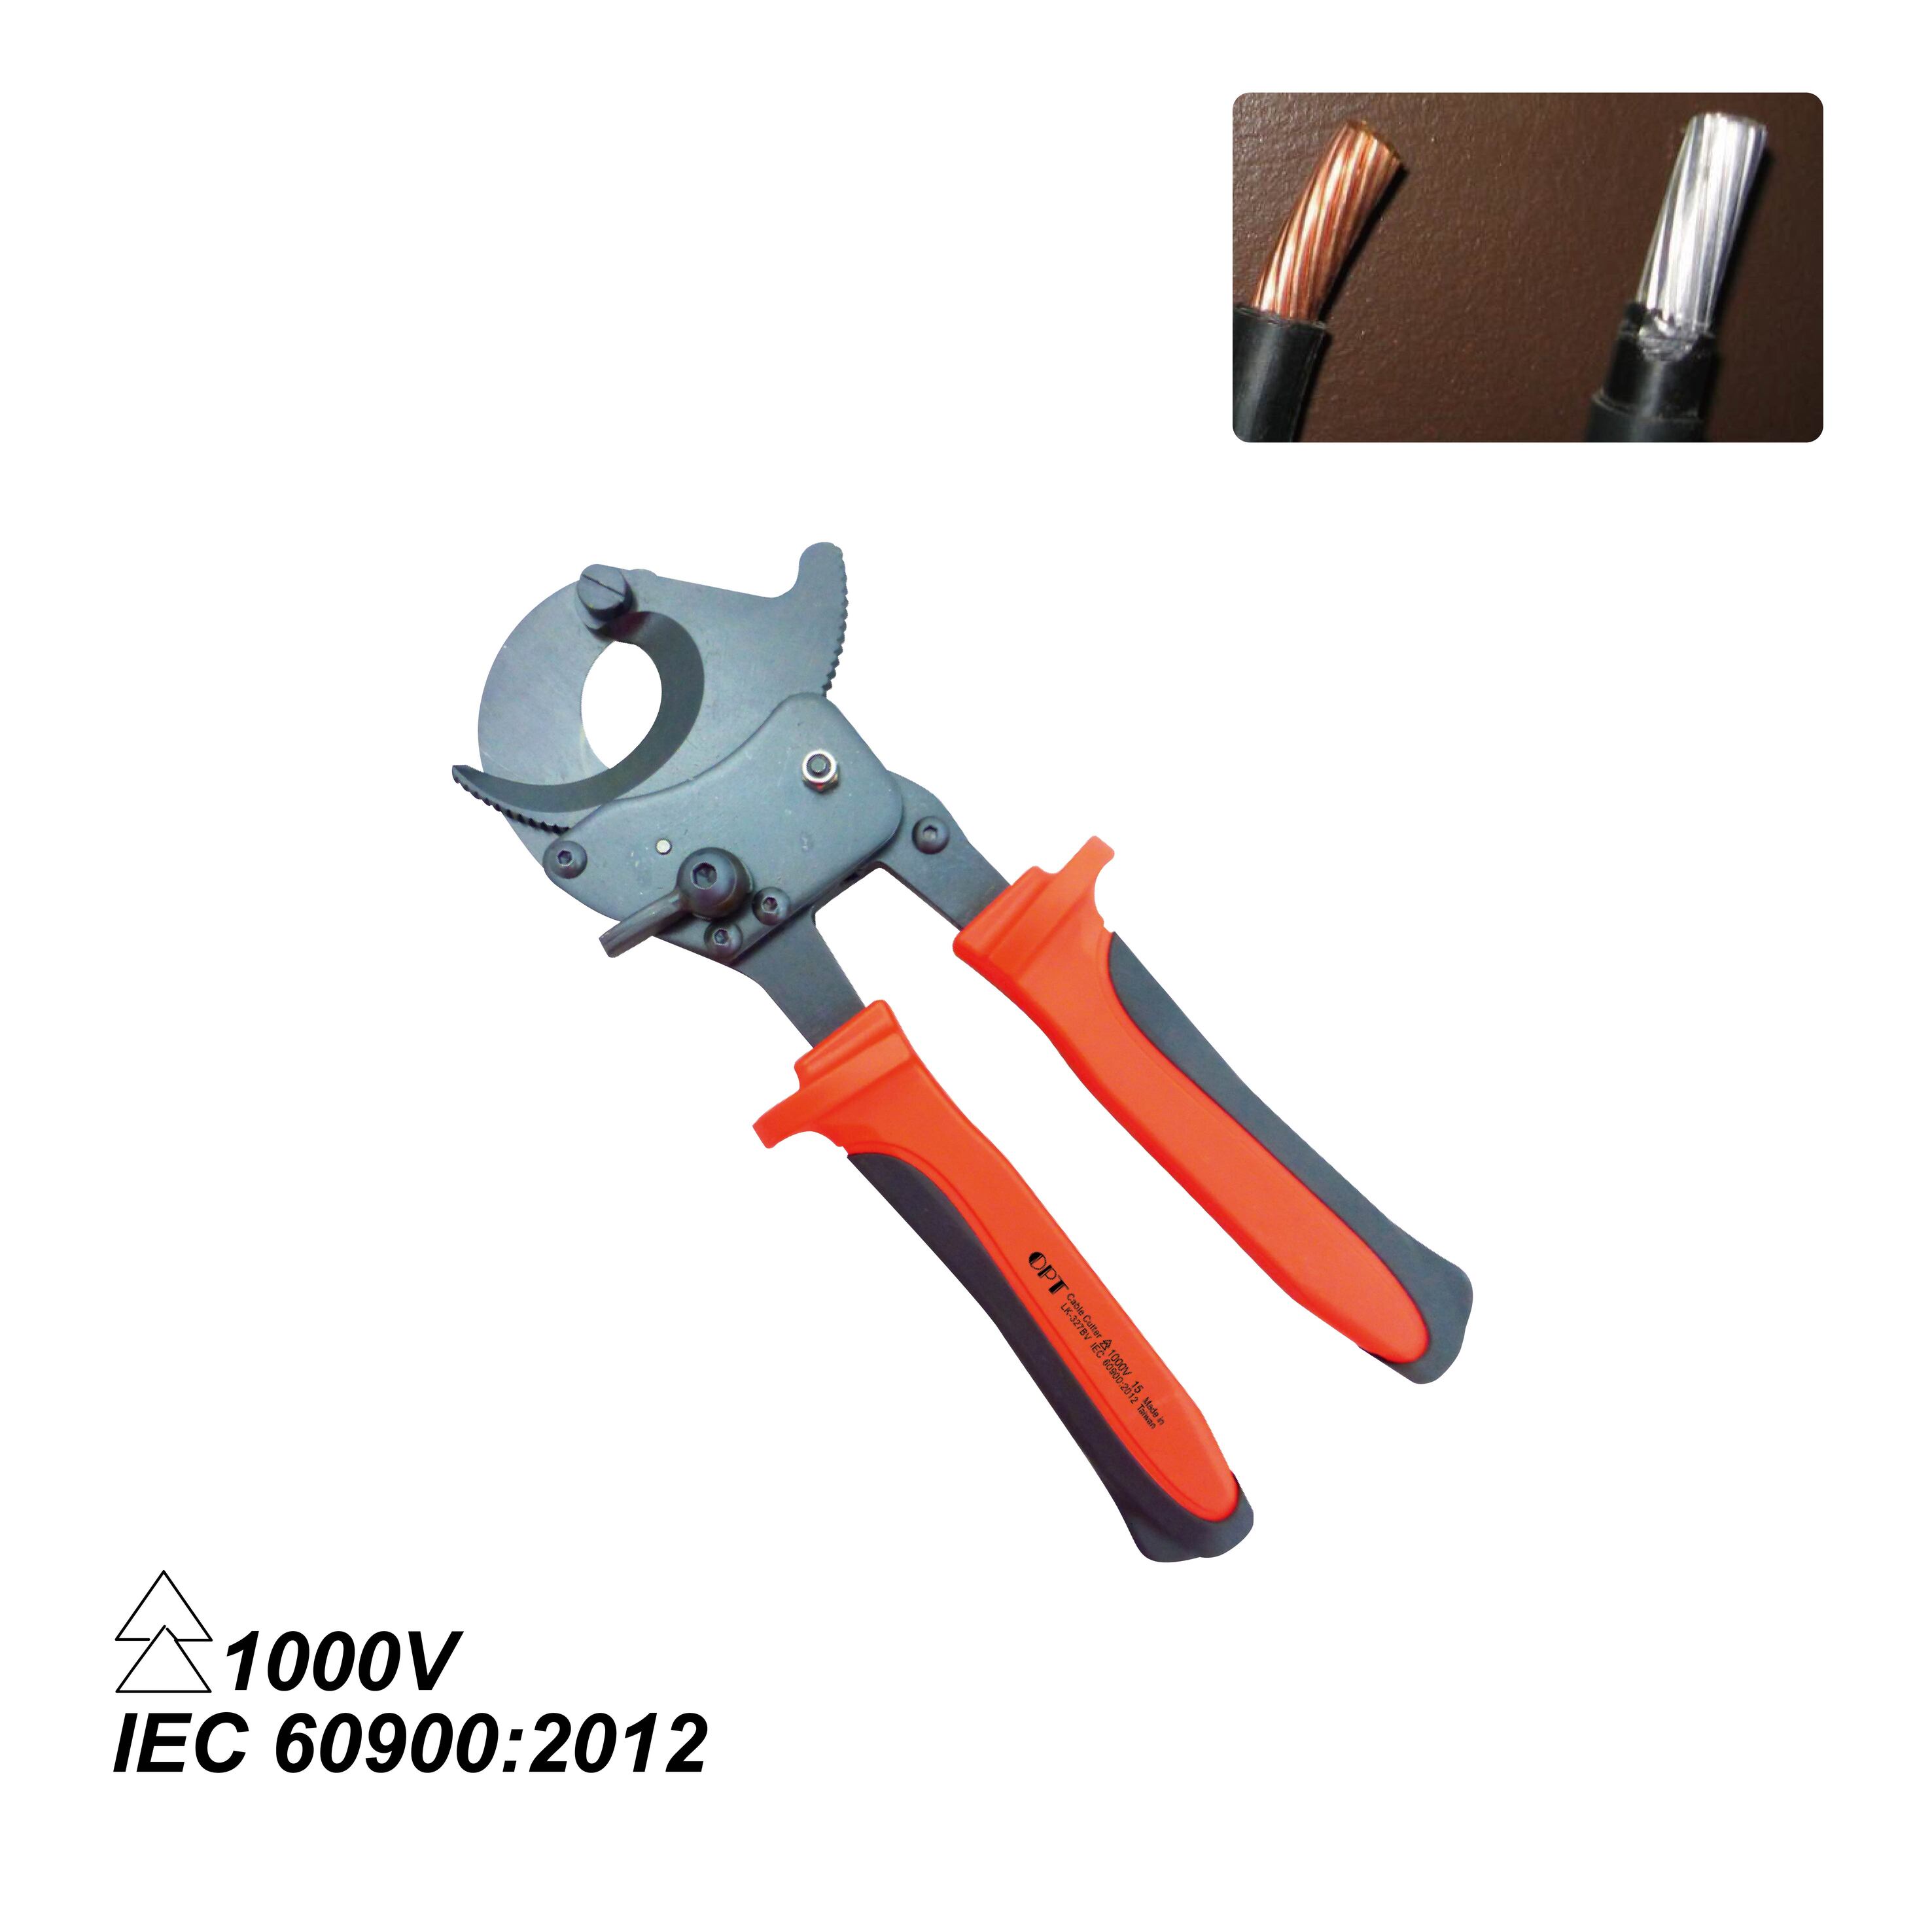 LK-327BV HAND CABLE CUTTERS